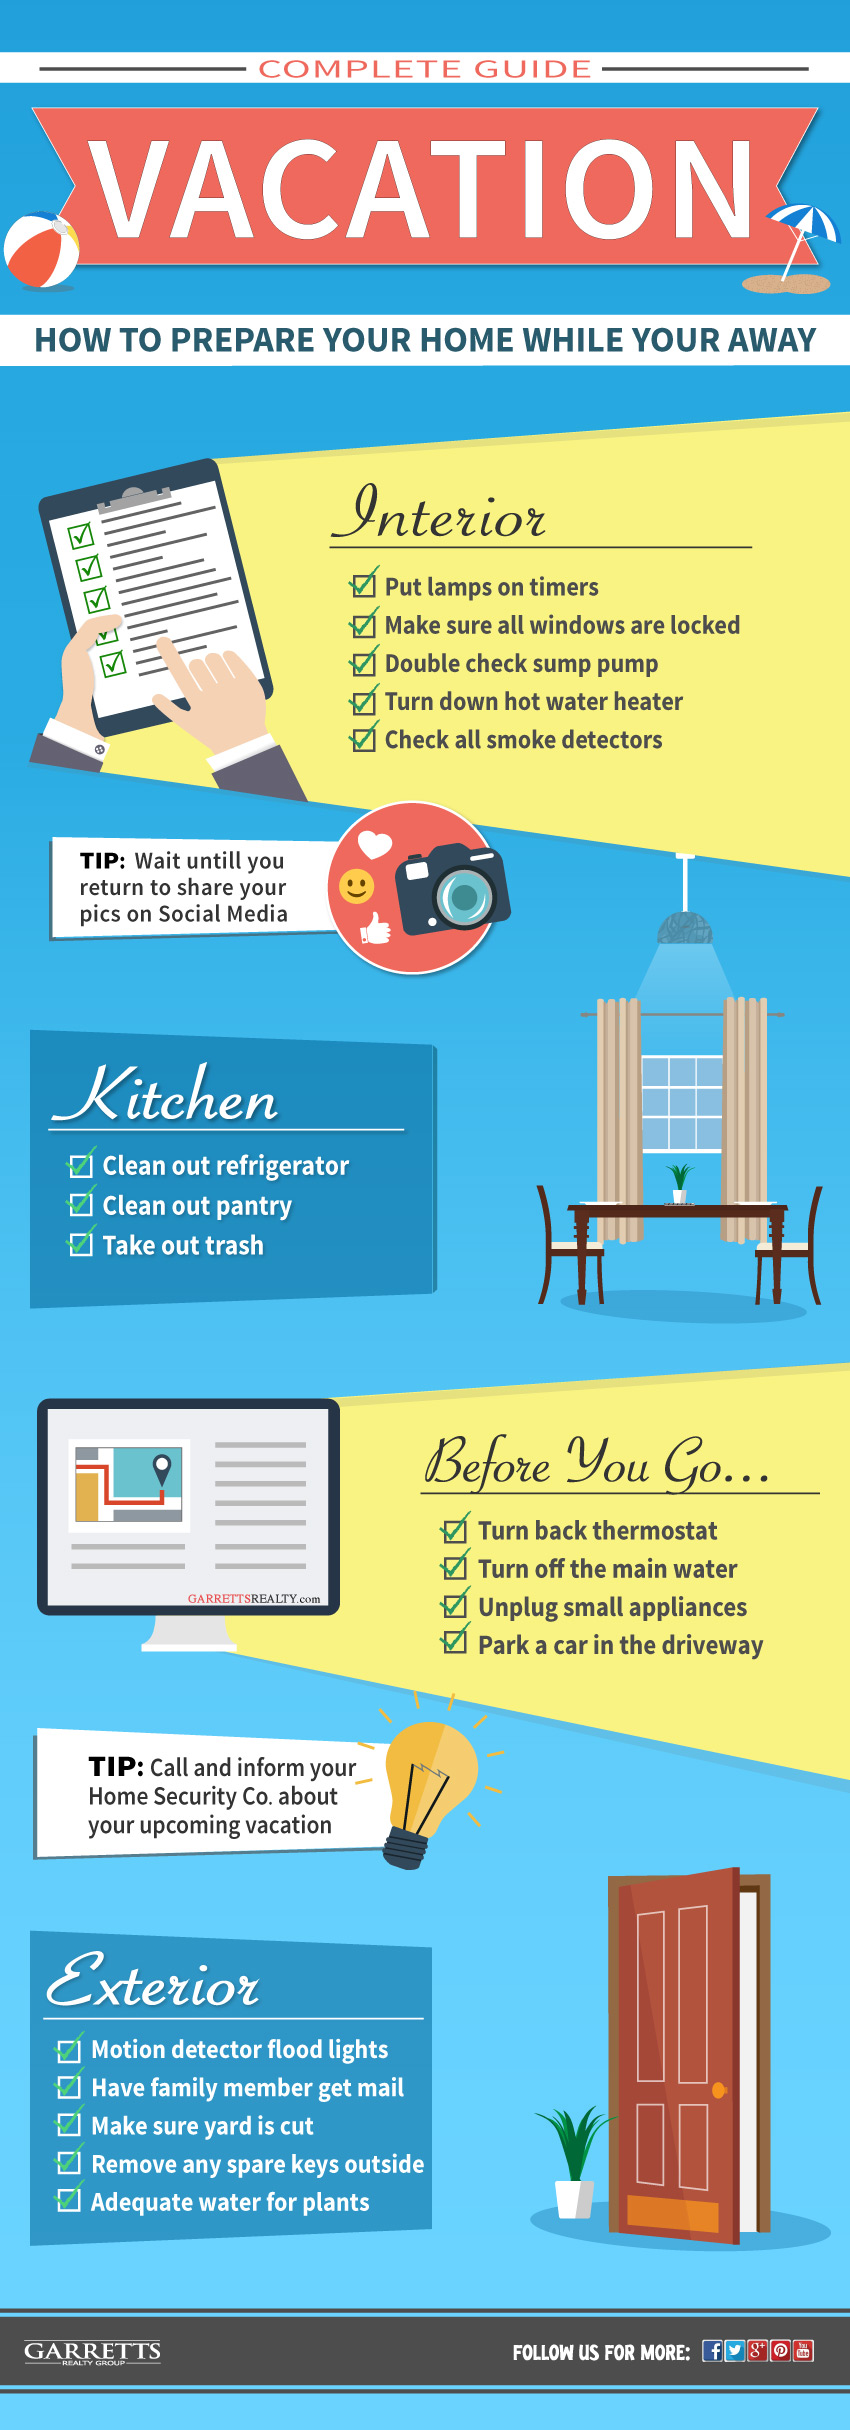 20 tips to prepare your house for vacation - Infographic.